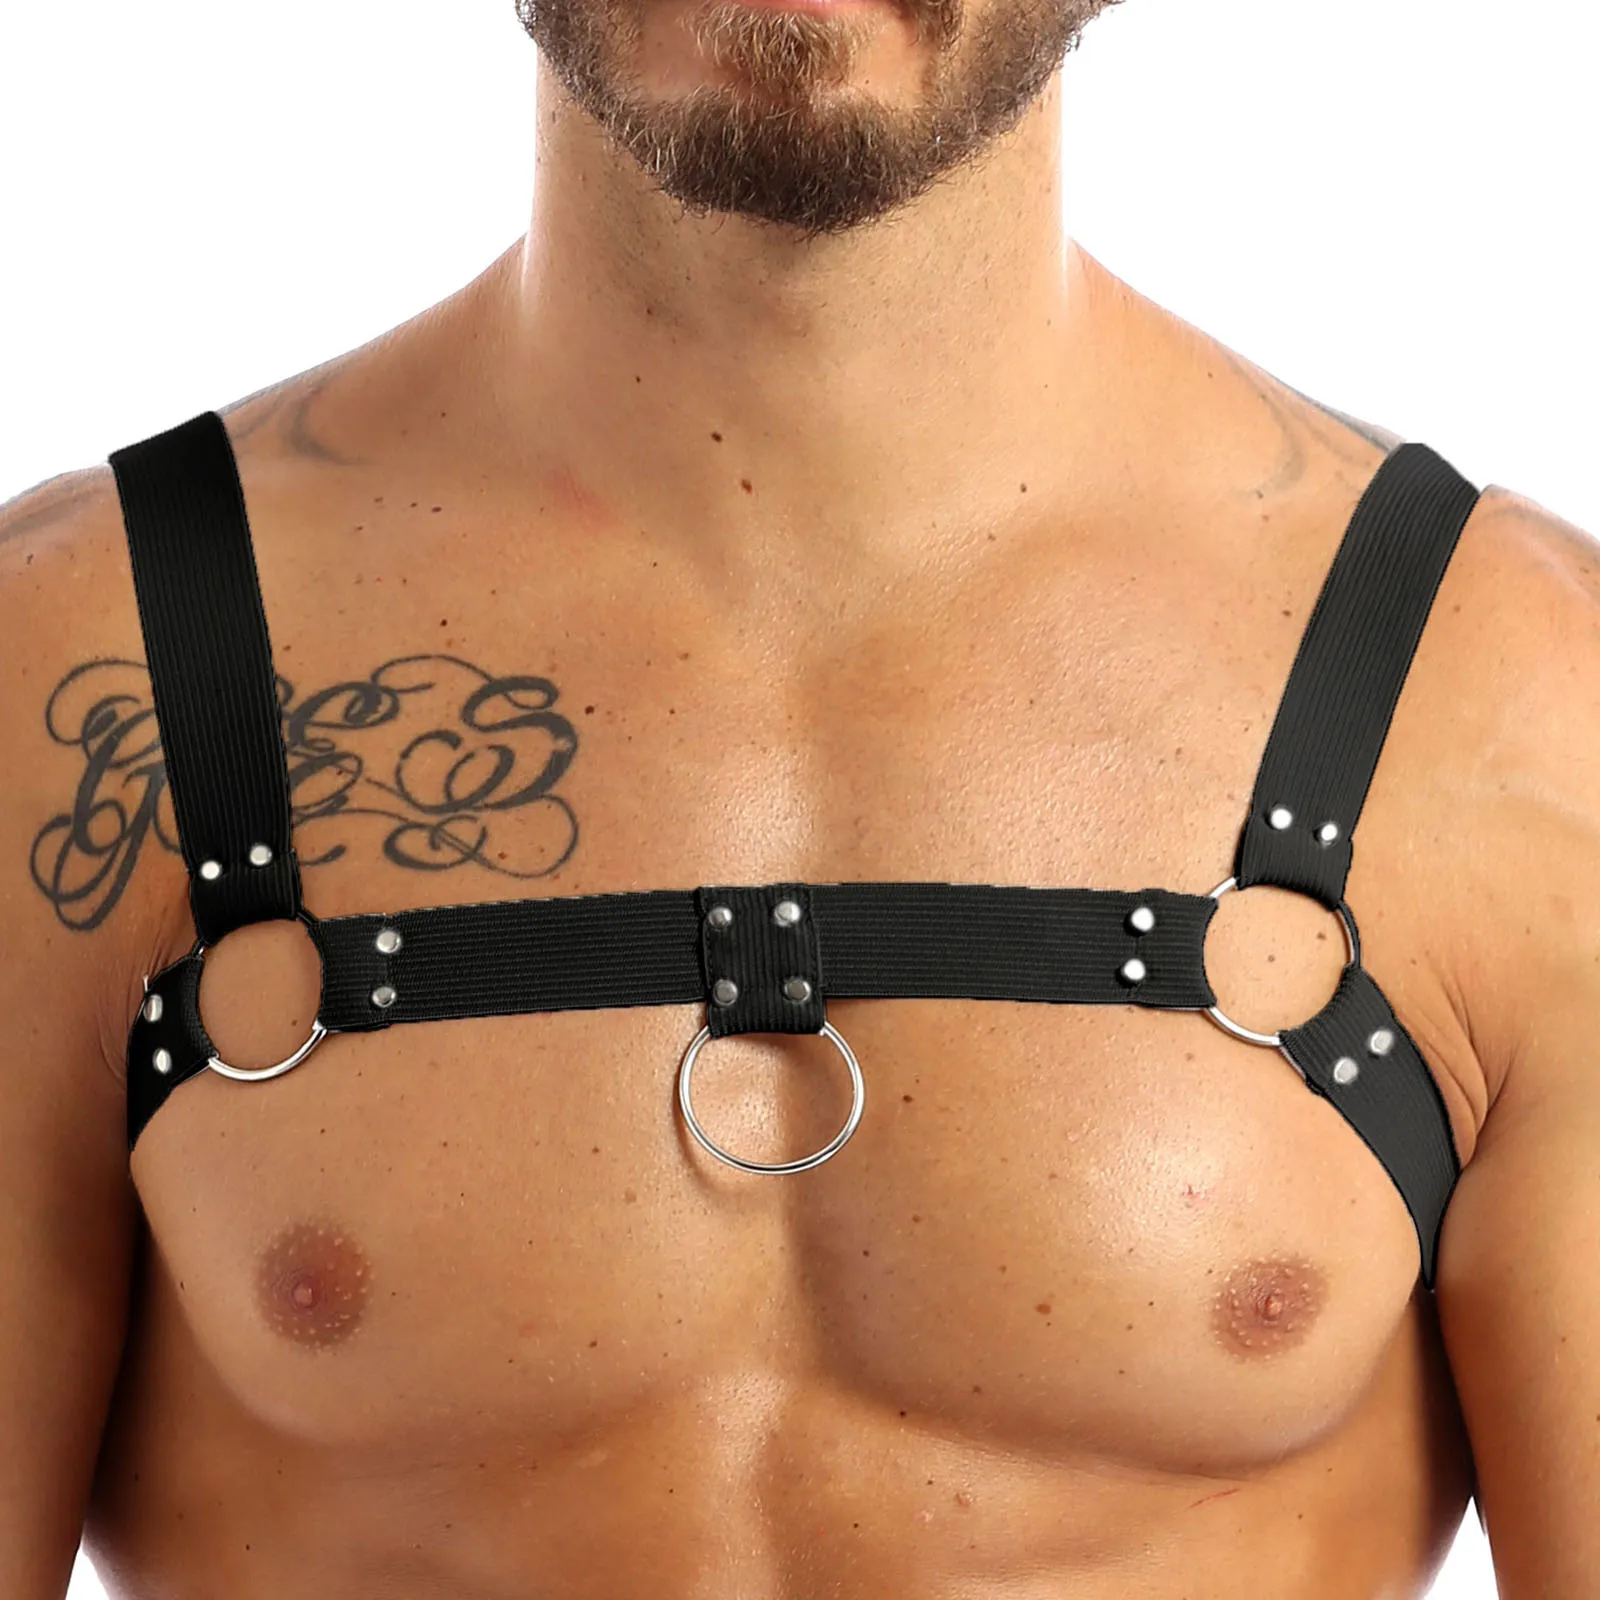 

MSemis Mens Male Lingerie Body Chest Harness Muscle Bondage Cage Gay Harness Belt with Metal O-rings Rivets Clubwear Costume